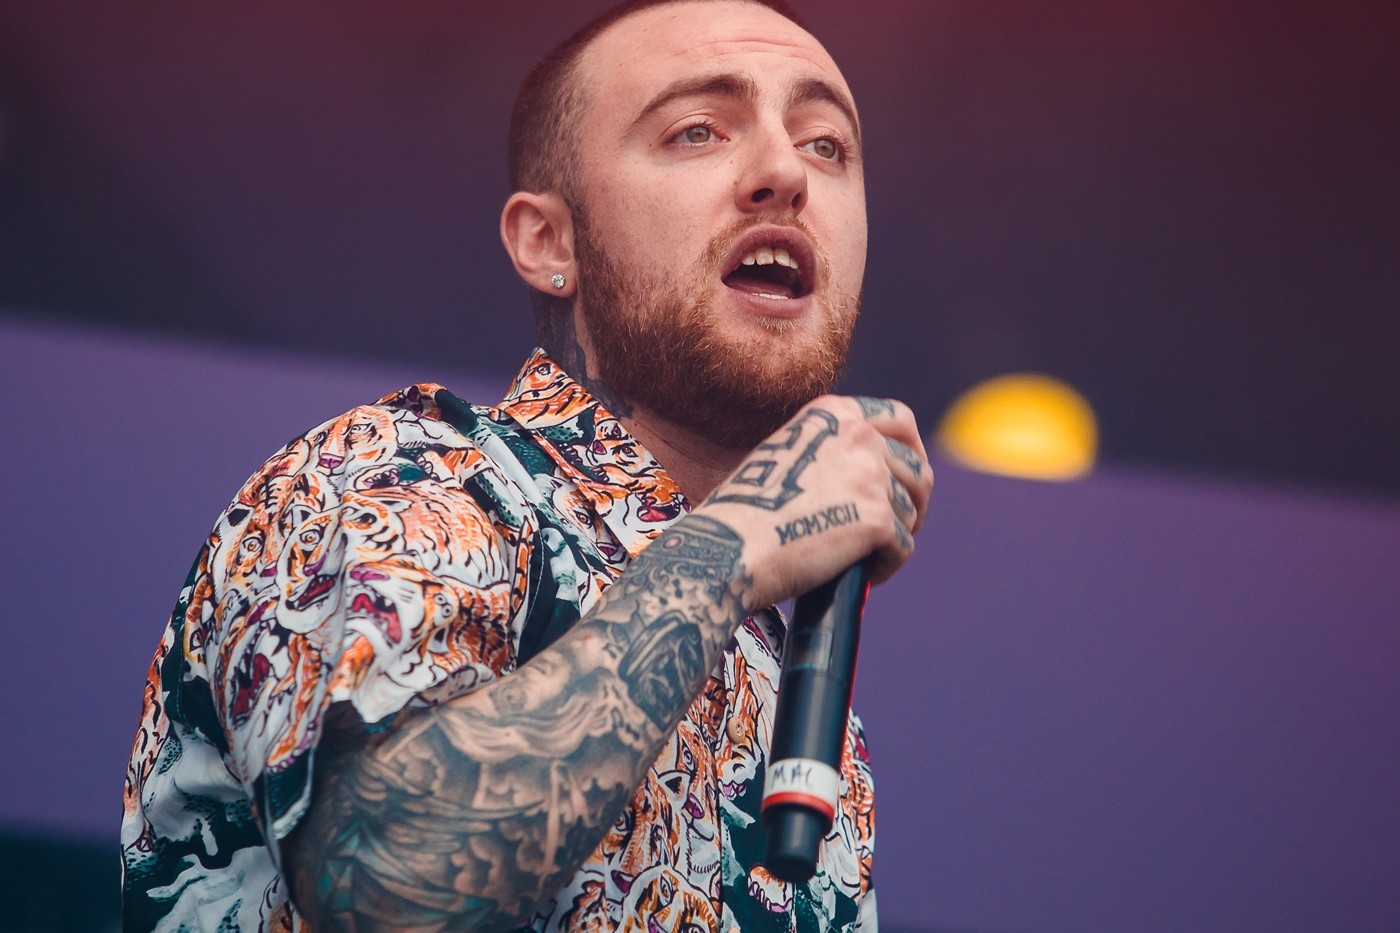 Three Men Arrested and Charged With the Death of Mac Miller